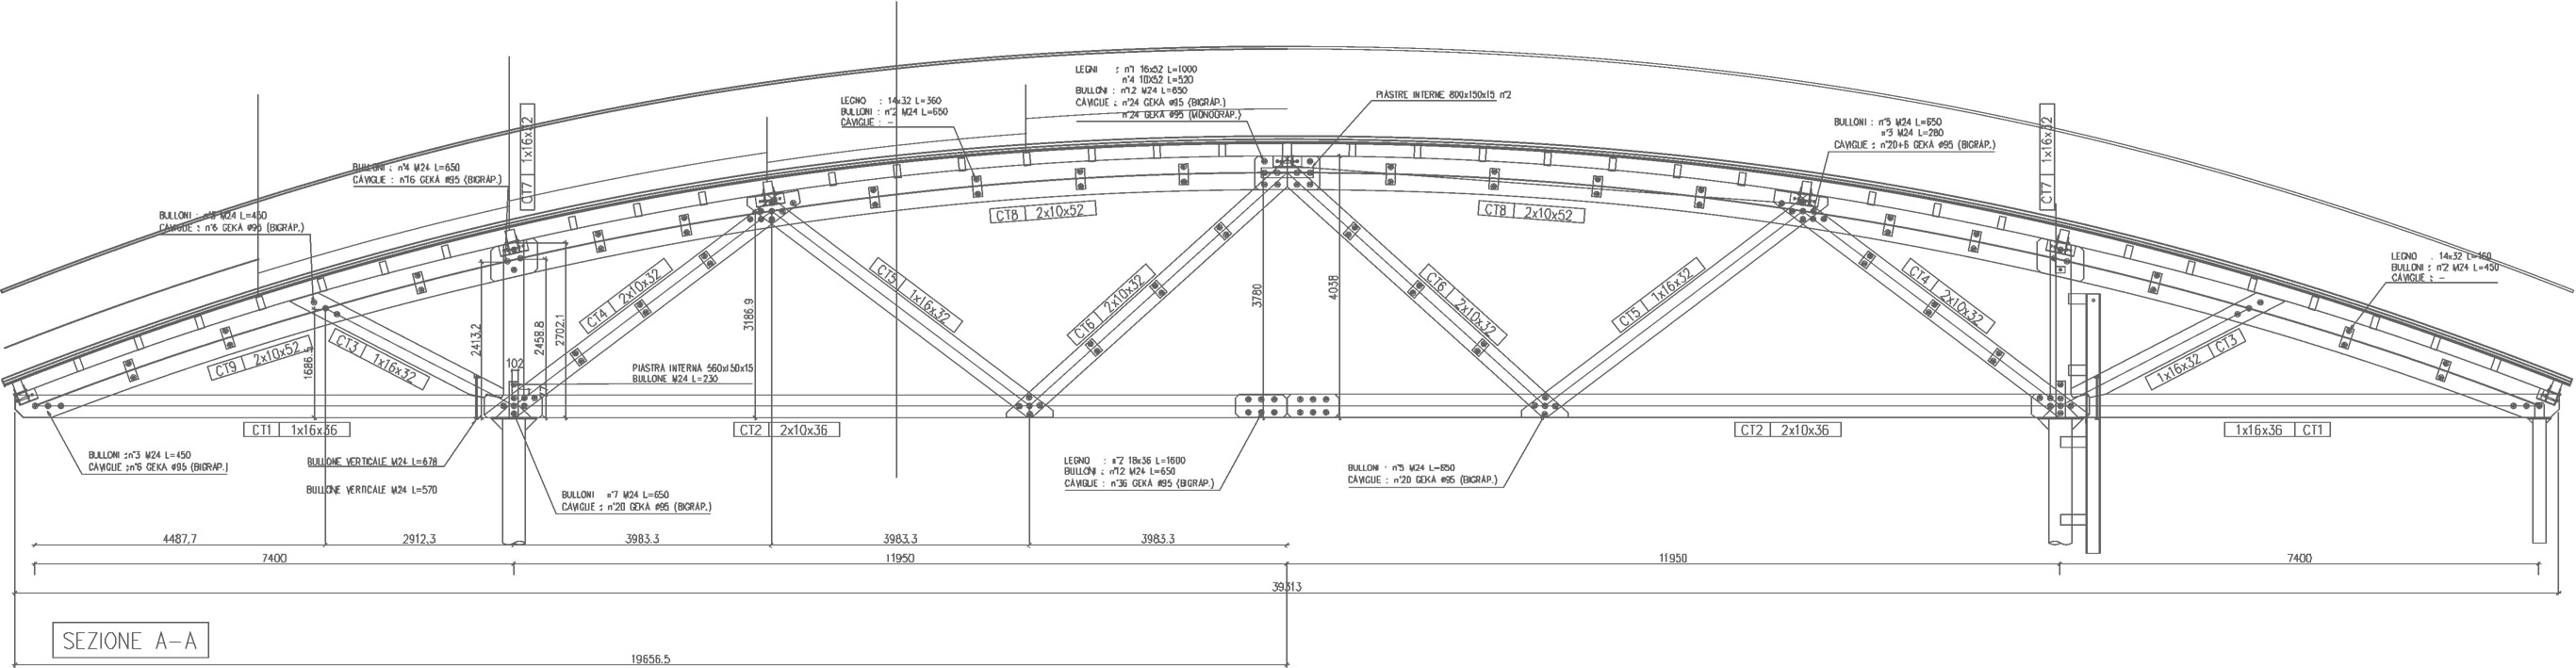 Wooden structure scheme for large lights